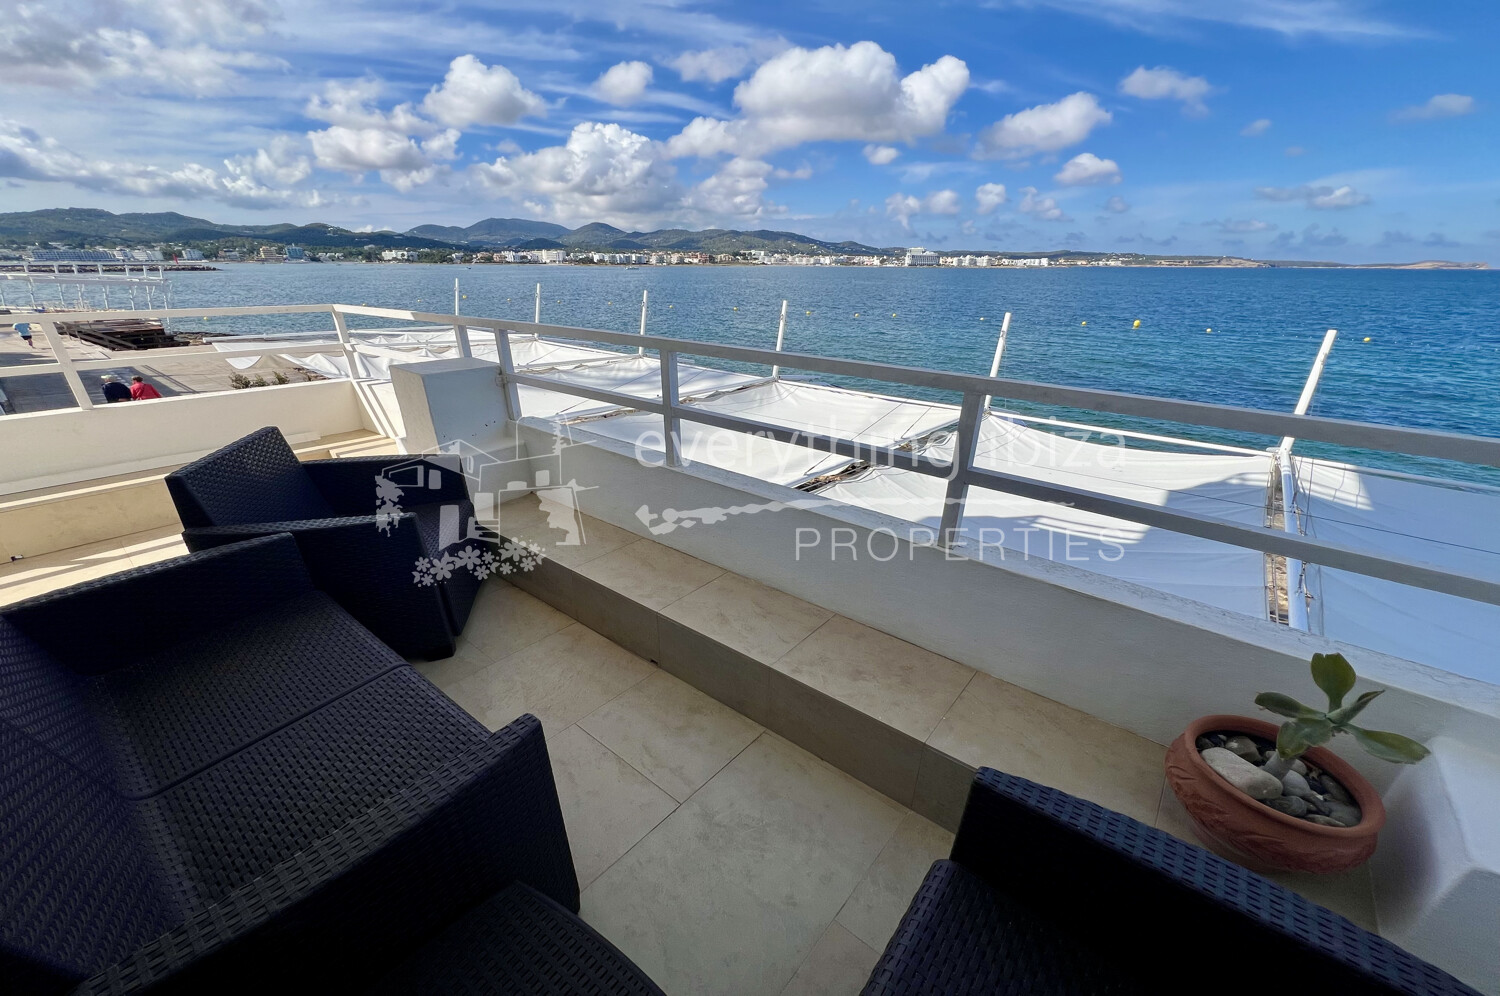 Coastline 2 Bed Apartment with Stunning Views in a Legendary Ibiza Location, ref. 1706, for sale in Ibiza by everything ibiza Properties